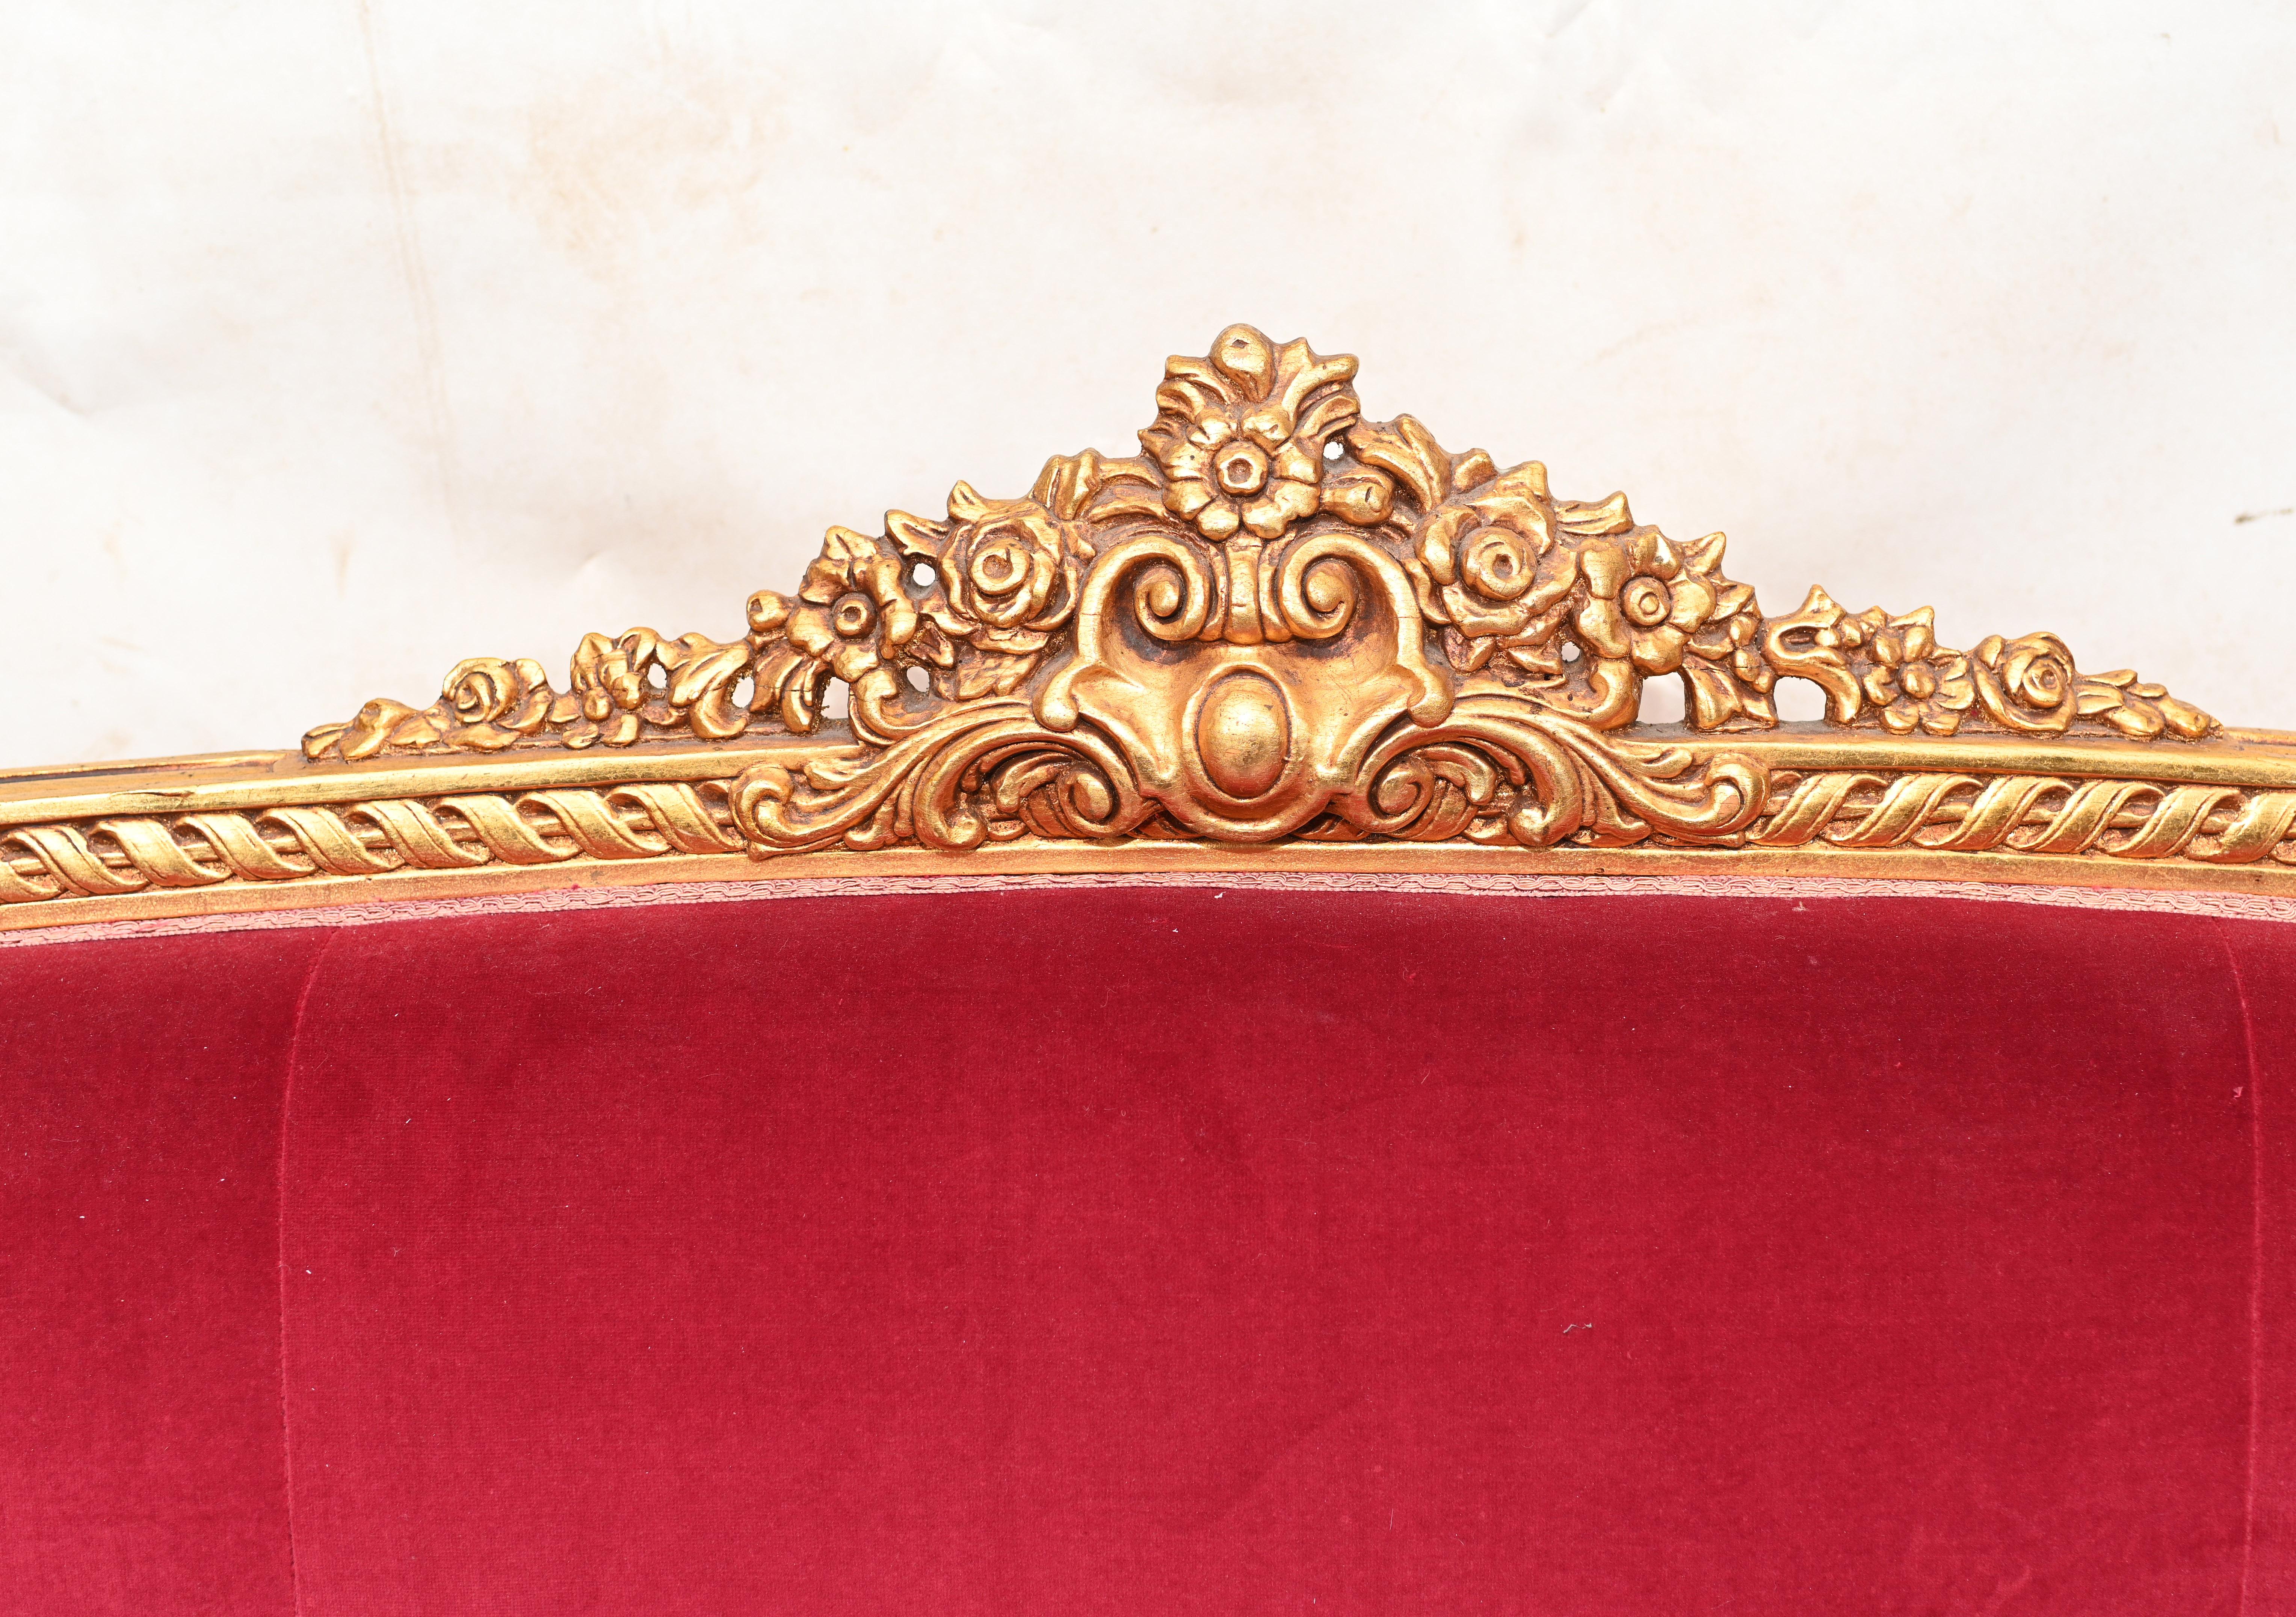 Gorgeous giltwood French Empire style sofa or couch
Intricately carved frame which has been finished in gilt
Elegant details include rosettes and arabesques
We date this to circa 1930s
Great interiors piece
Purchased from a dealer on Rue de Rossiers